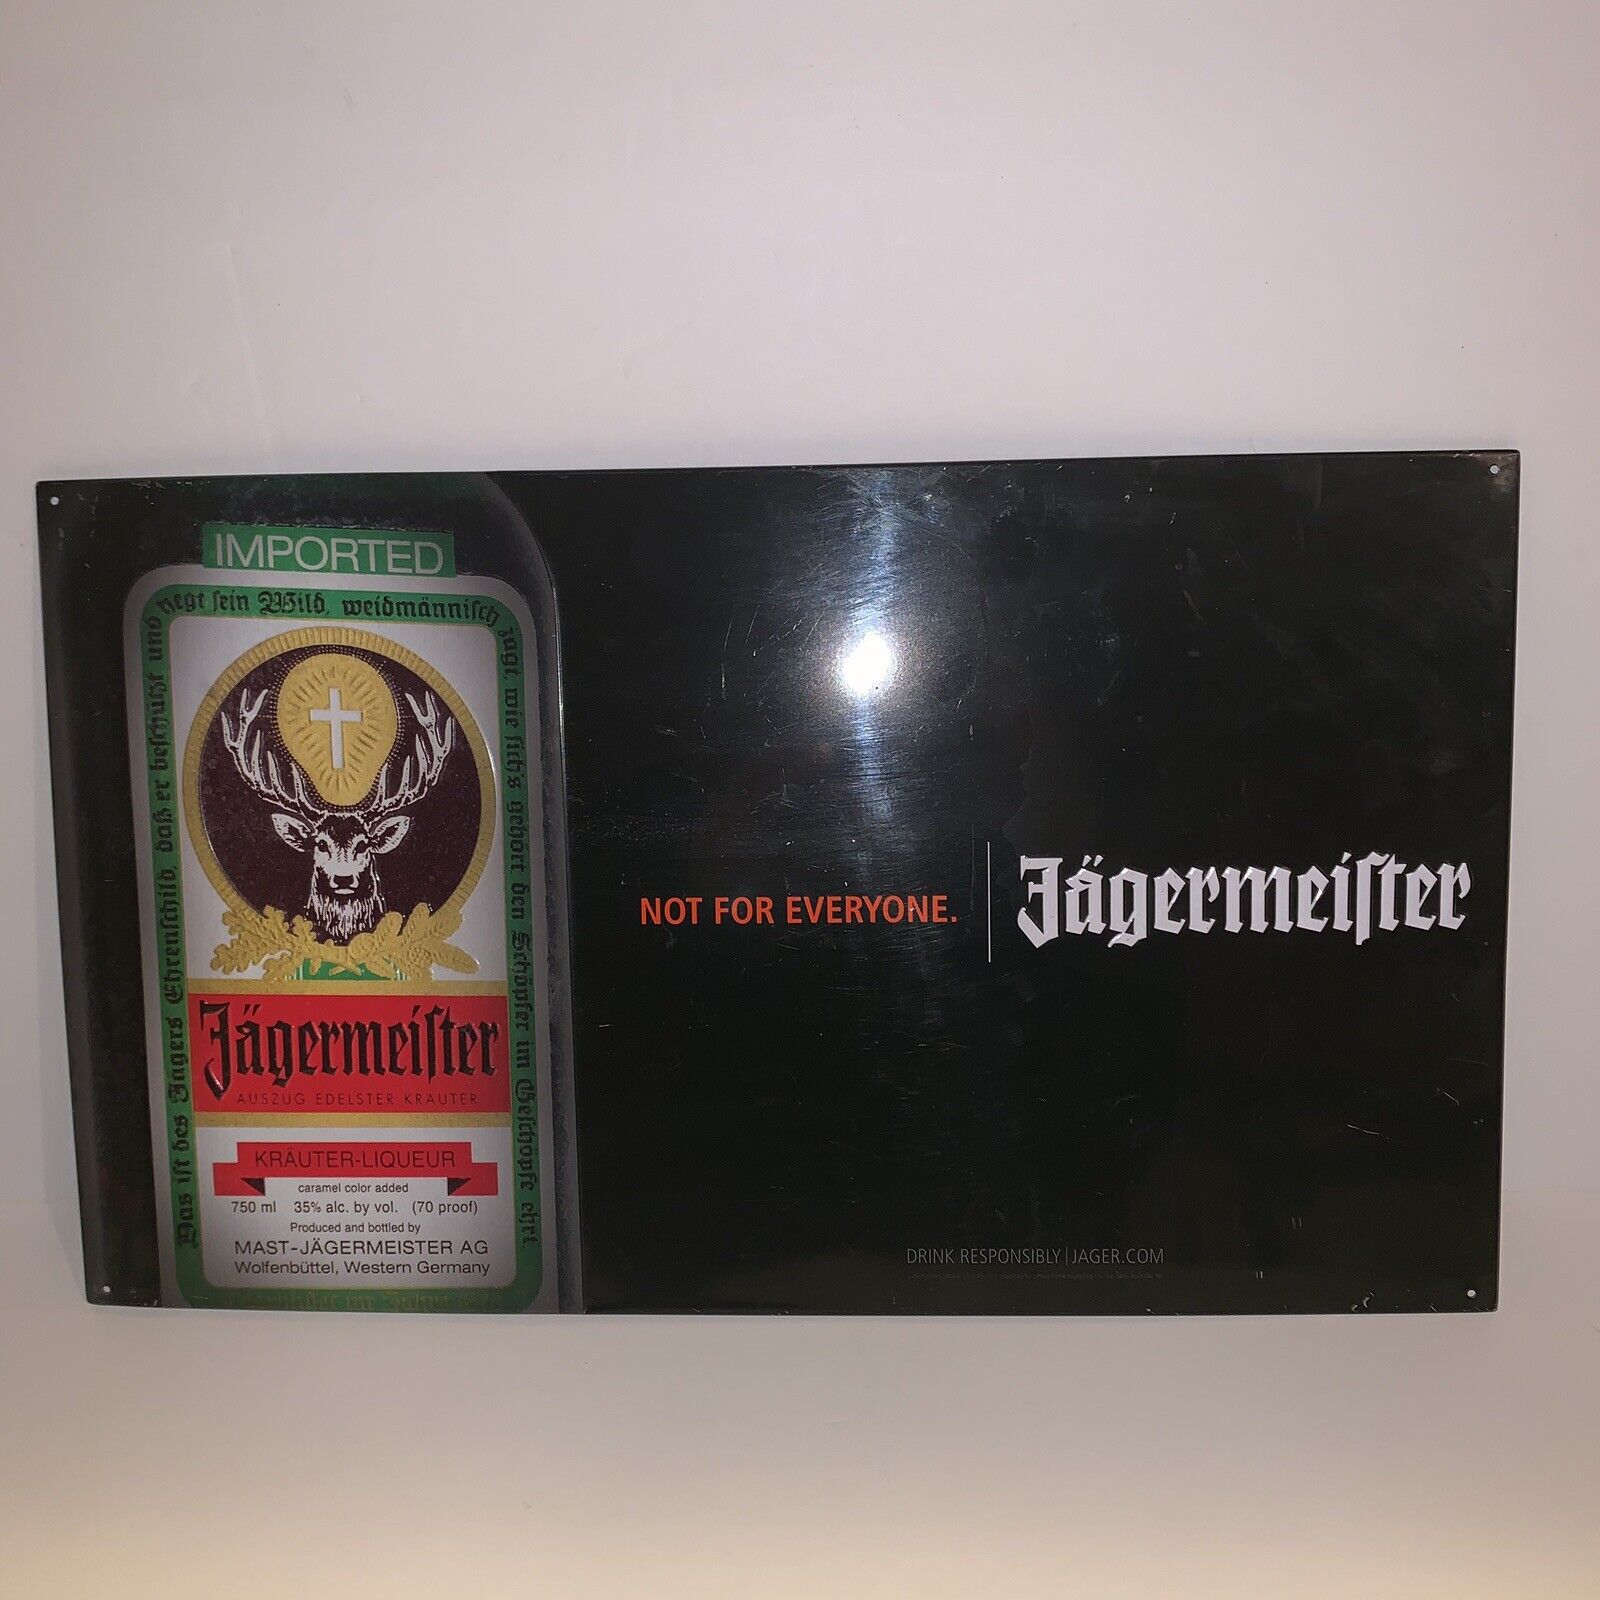 Man Cave Sign Jagermeister Used Good Condition Has Some Scratches See Pics E15